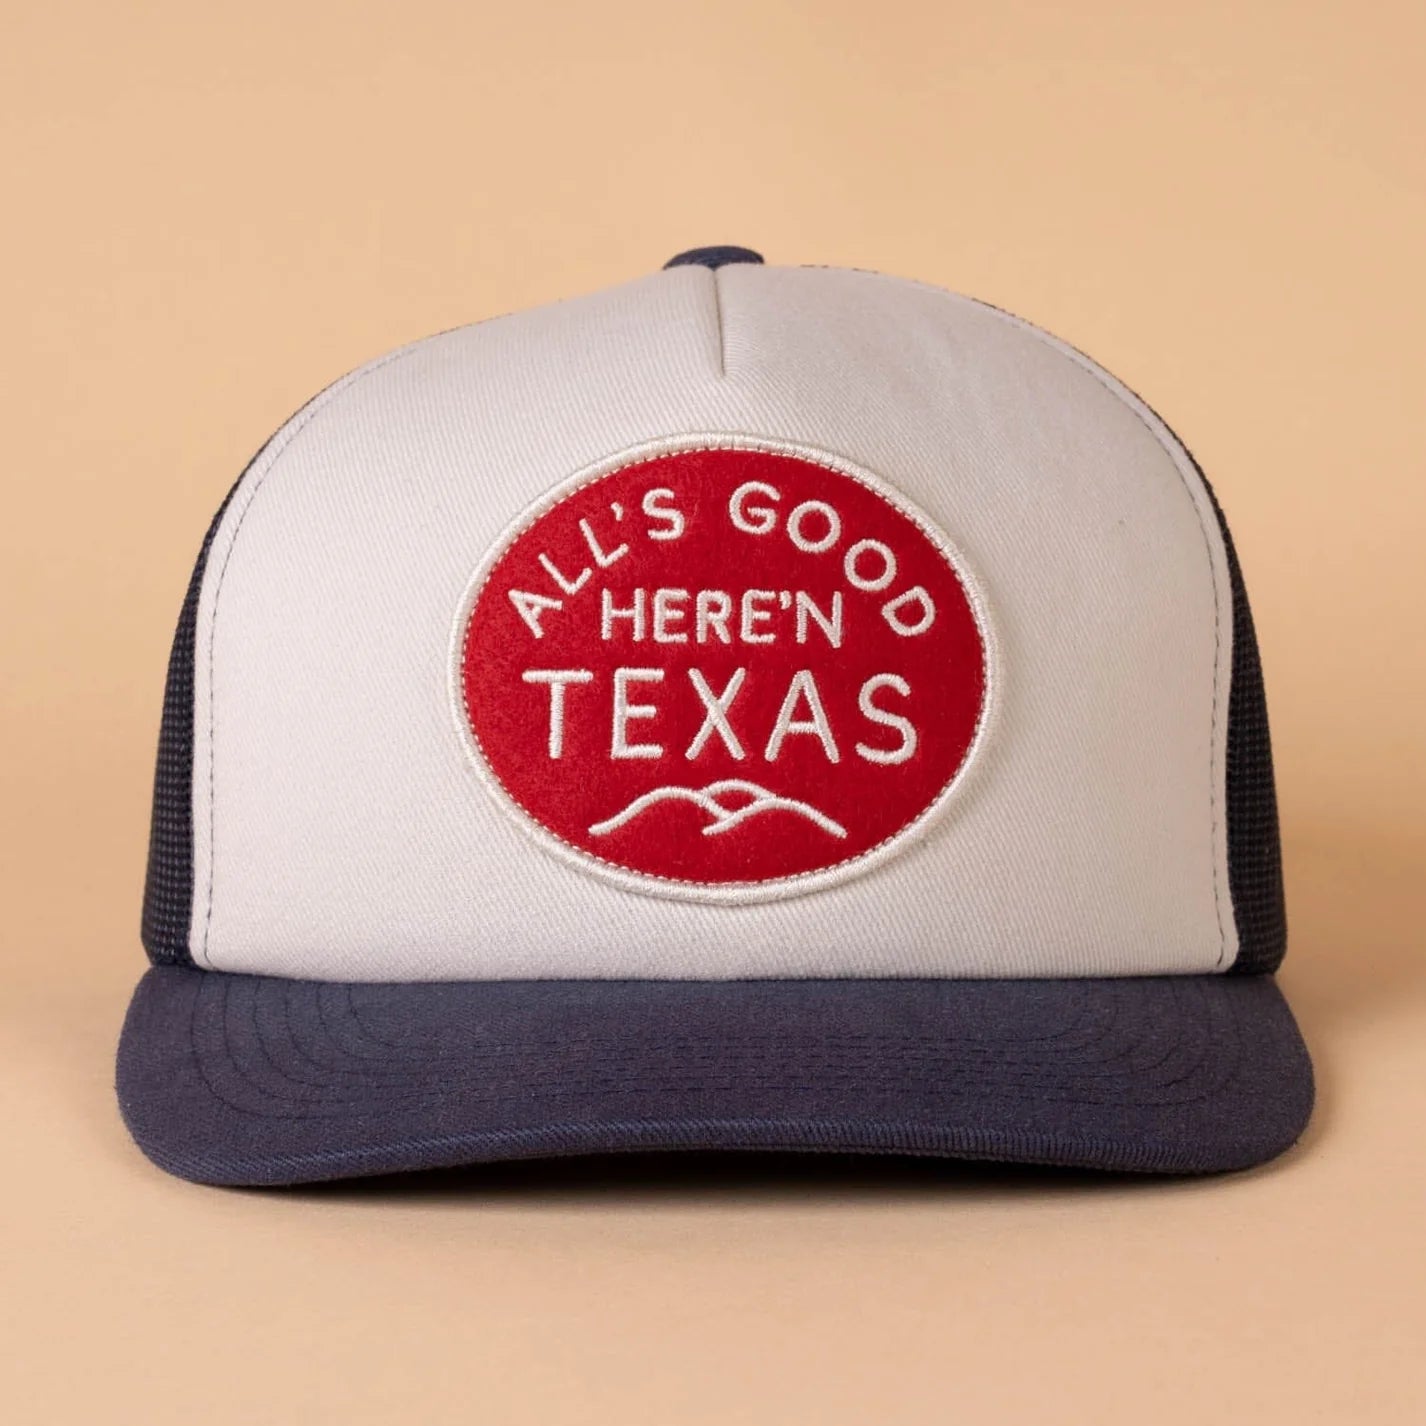 All's Good Here'n Texas Retro Hat